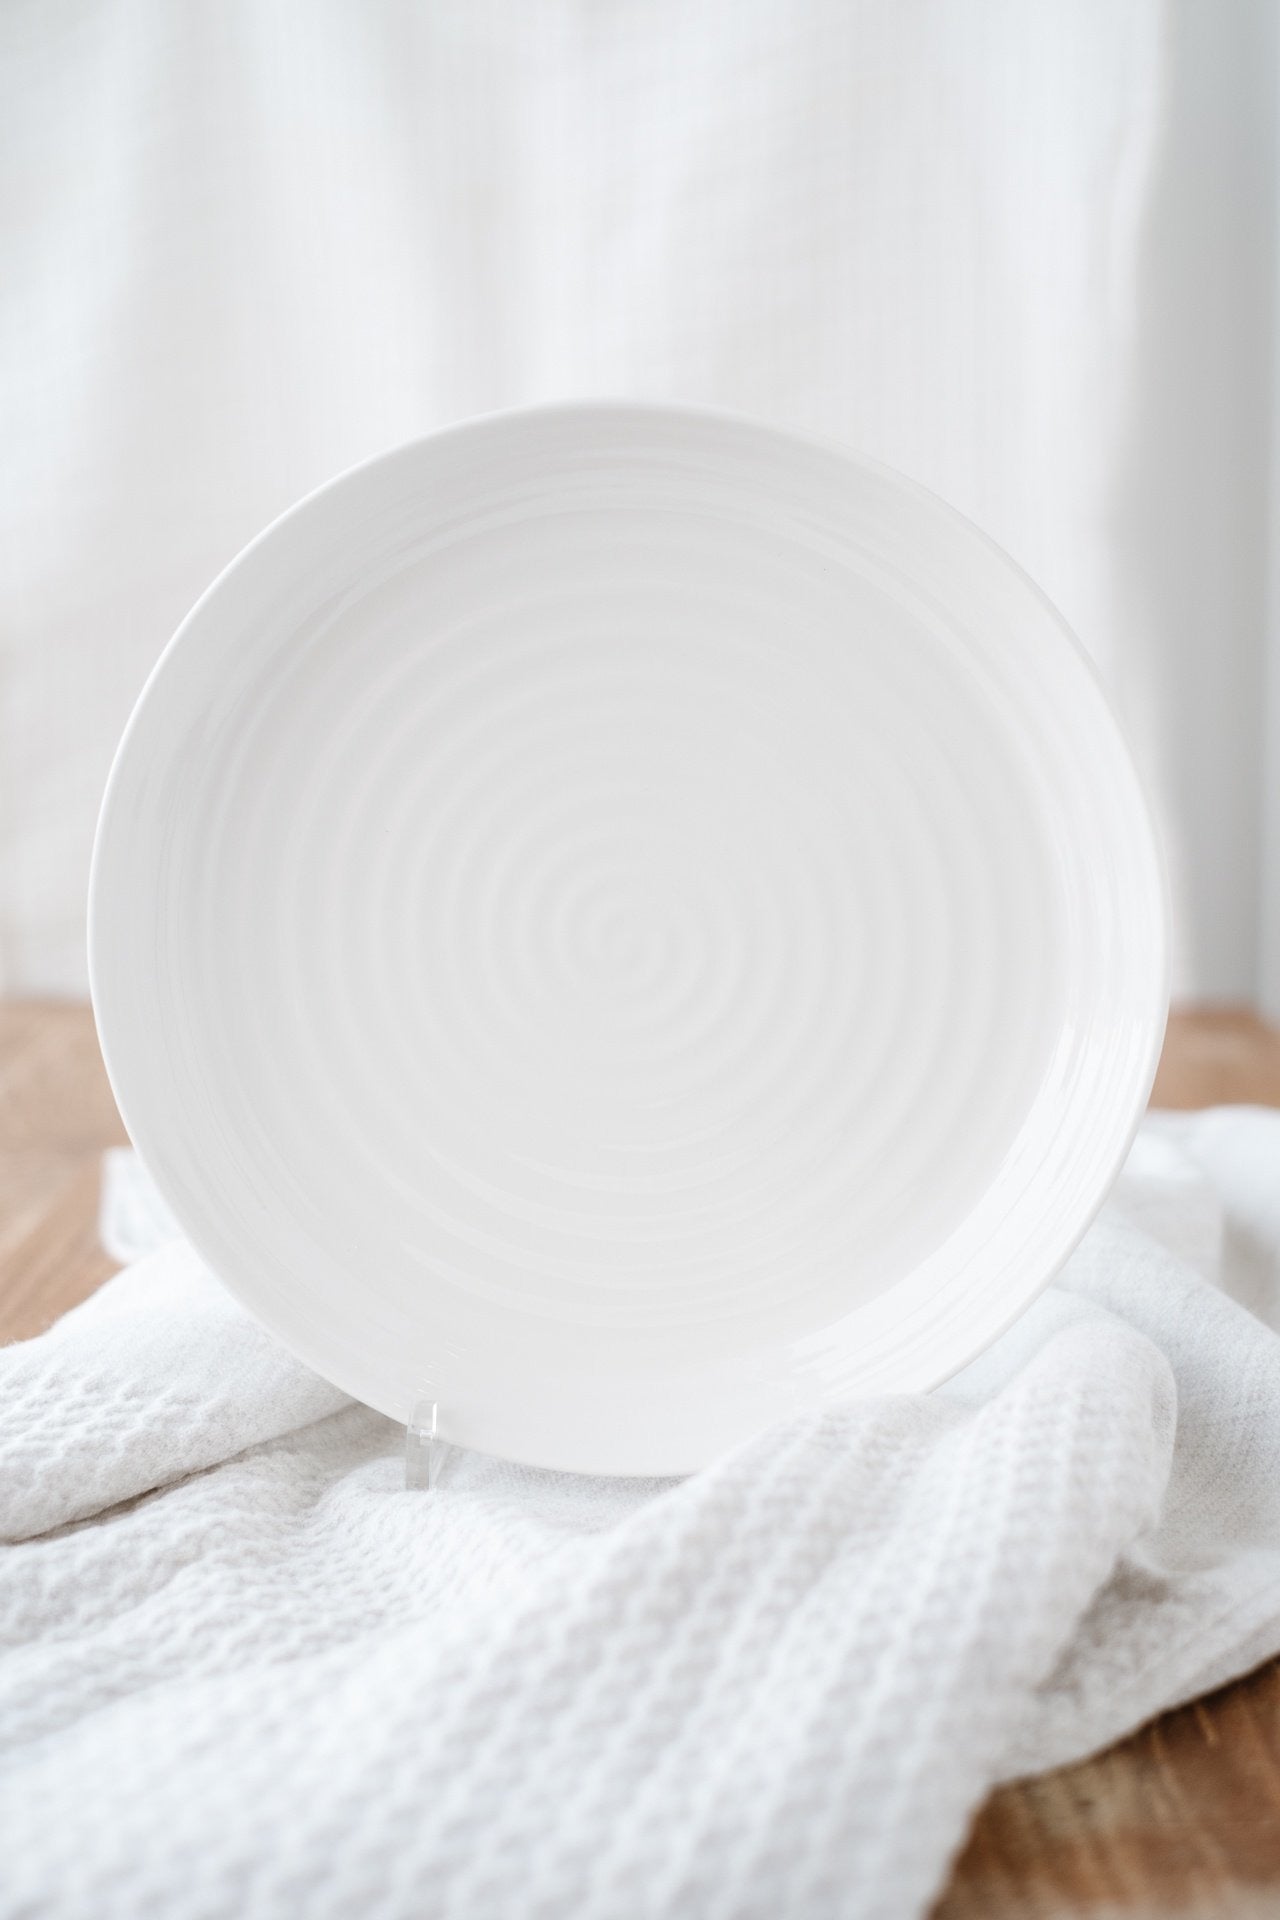 Sophie Conran 10.5" Coupe Dinner Plate *